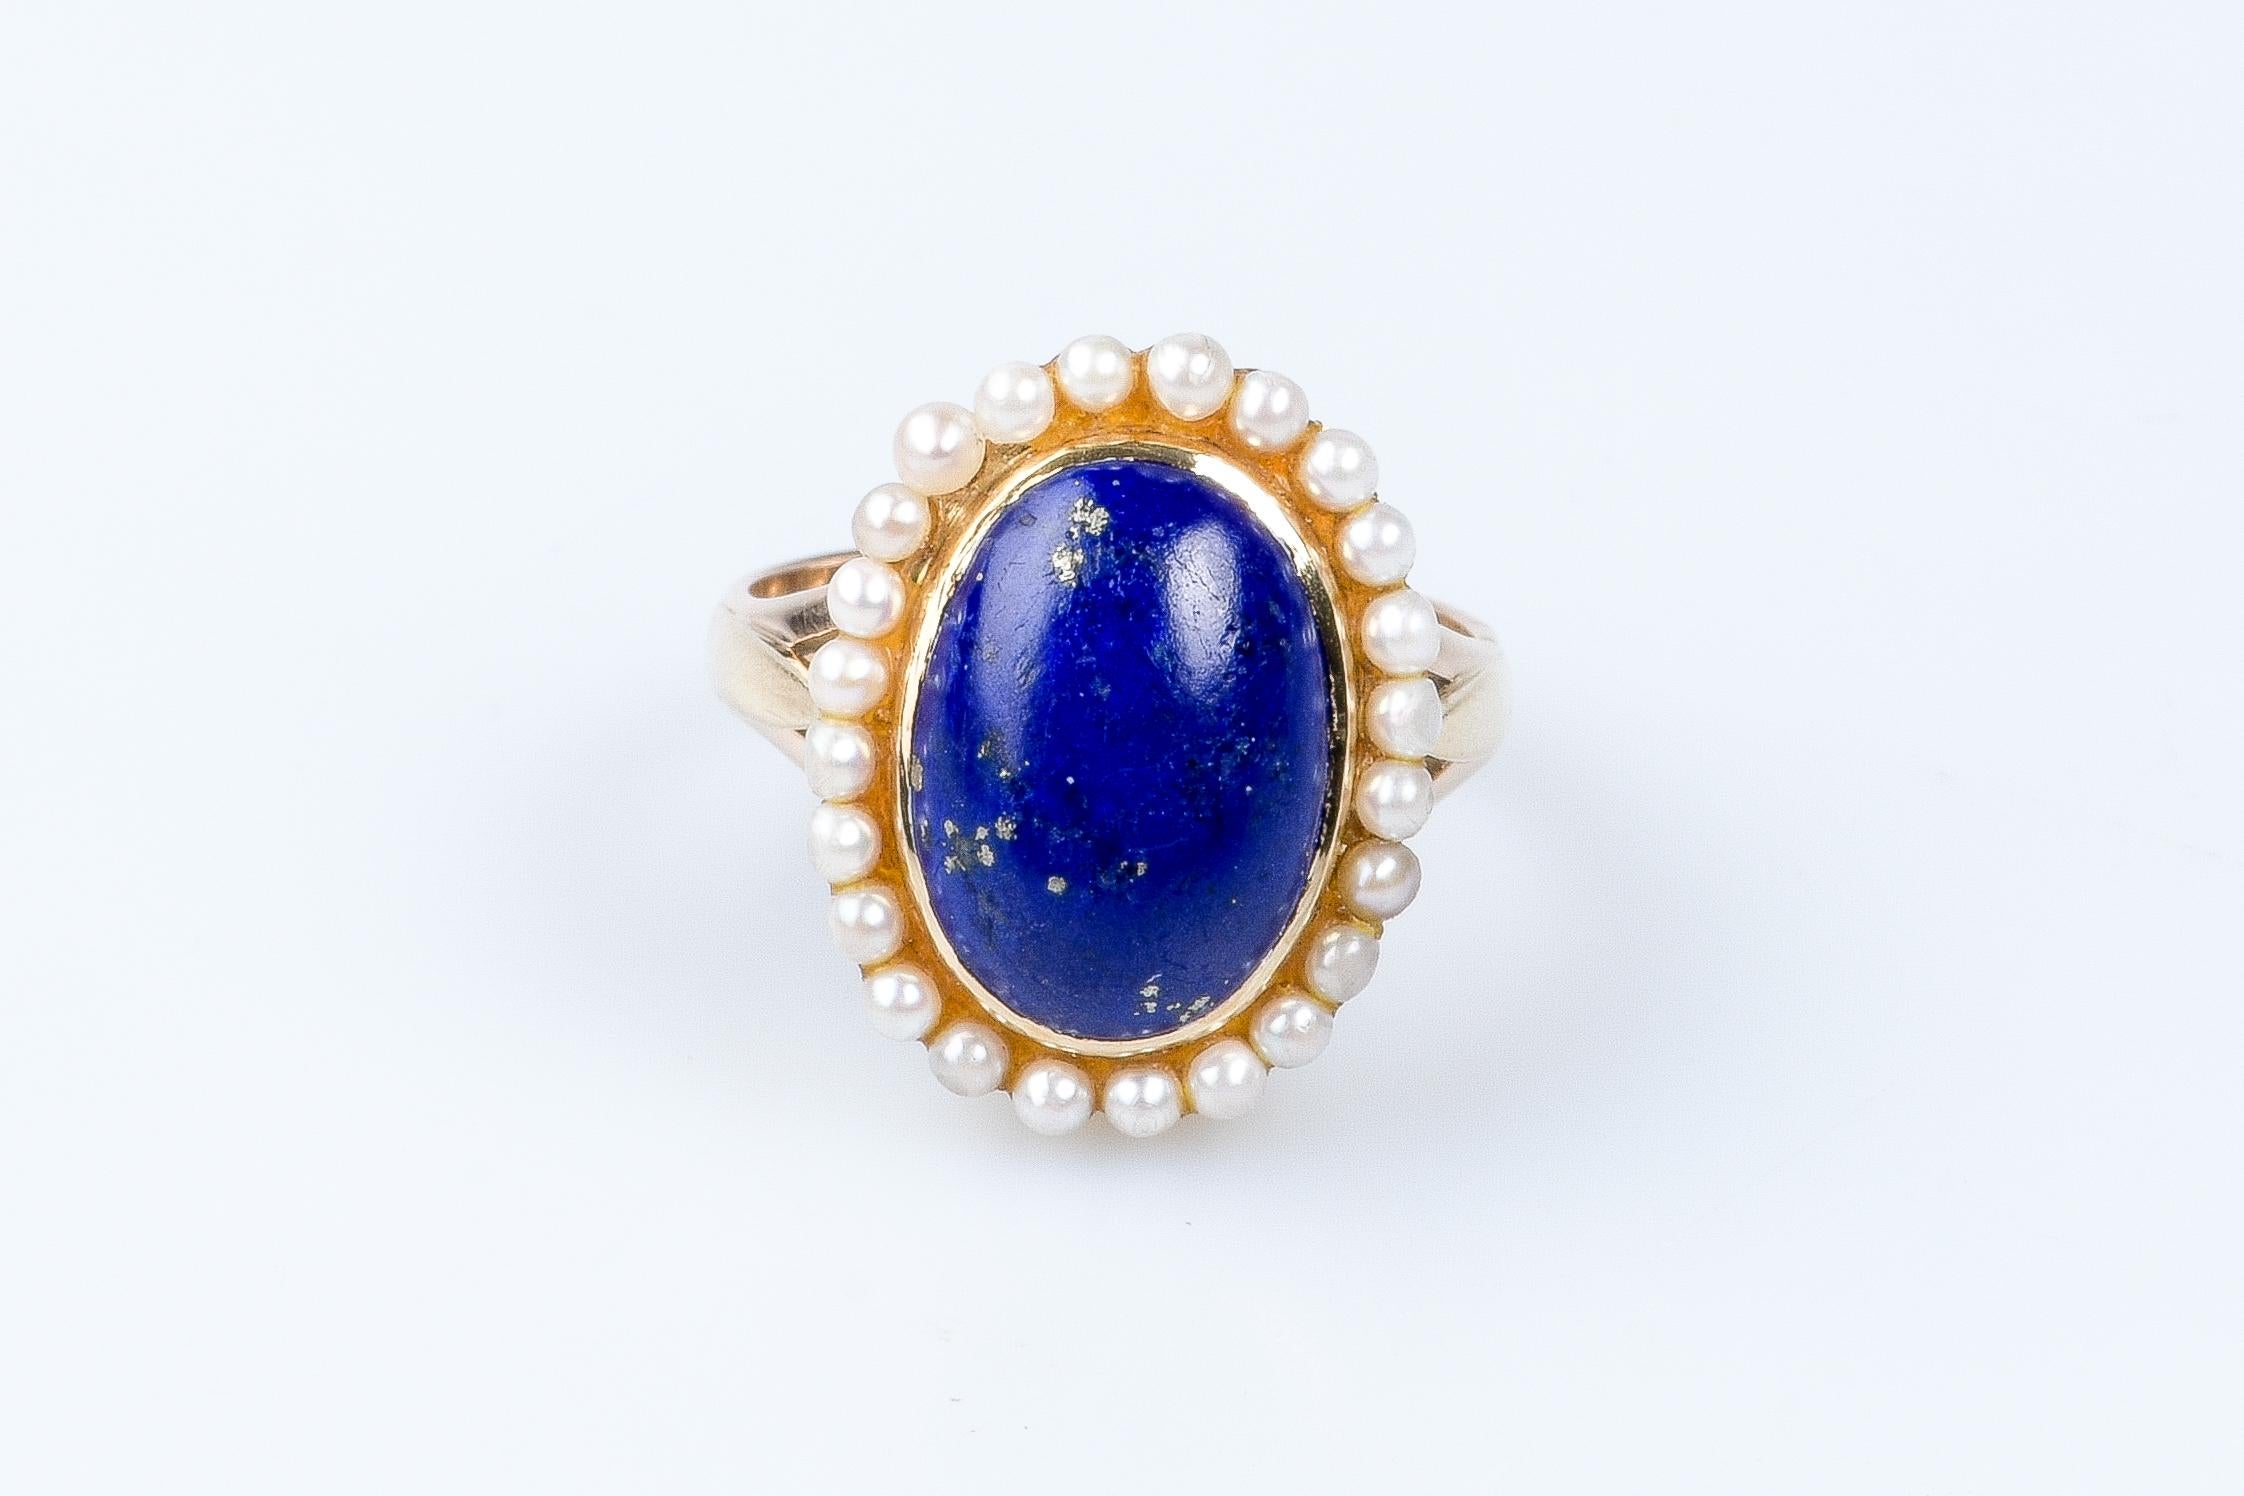 14 carat yellow gold ring designed with 1 oval lapis lazuli weighing 2.20 carats surrounded by 24 round white cultured pearls.

 Weight : 7.60 gr. 

Size: EU : 53  - SP/IT : 13 - US : 6.5

Dimensions : 1.92 x 1.50 x 0.35 cm

Jewel delivered in a